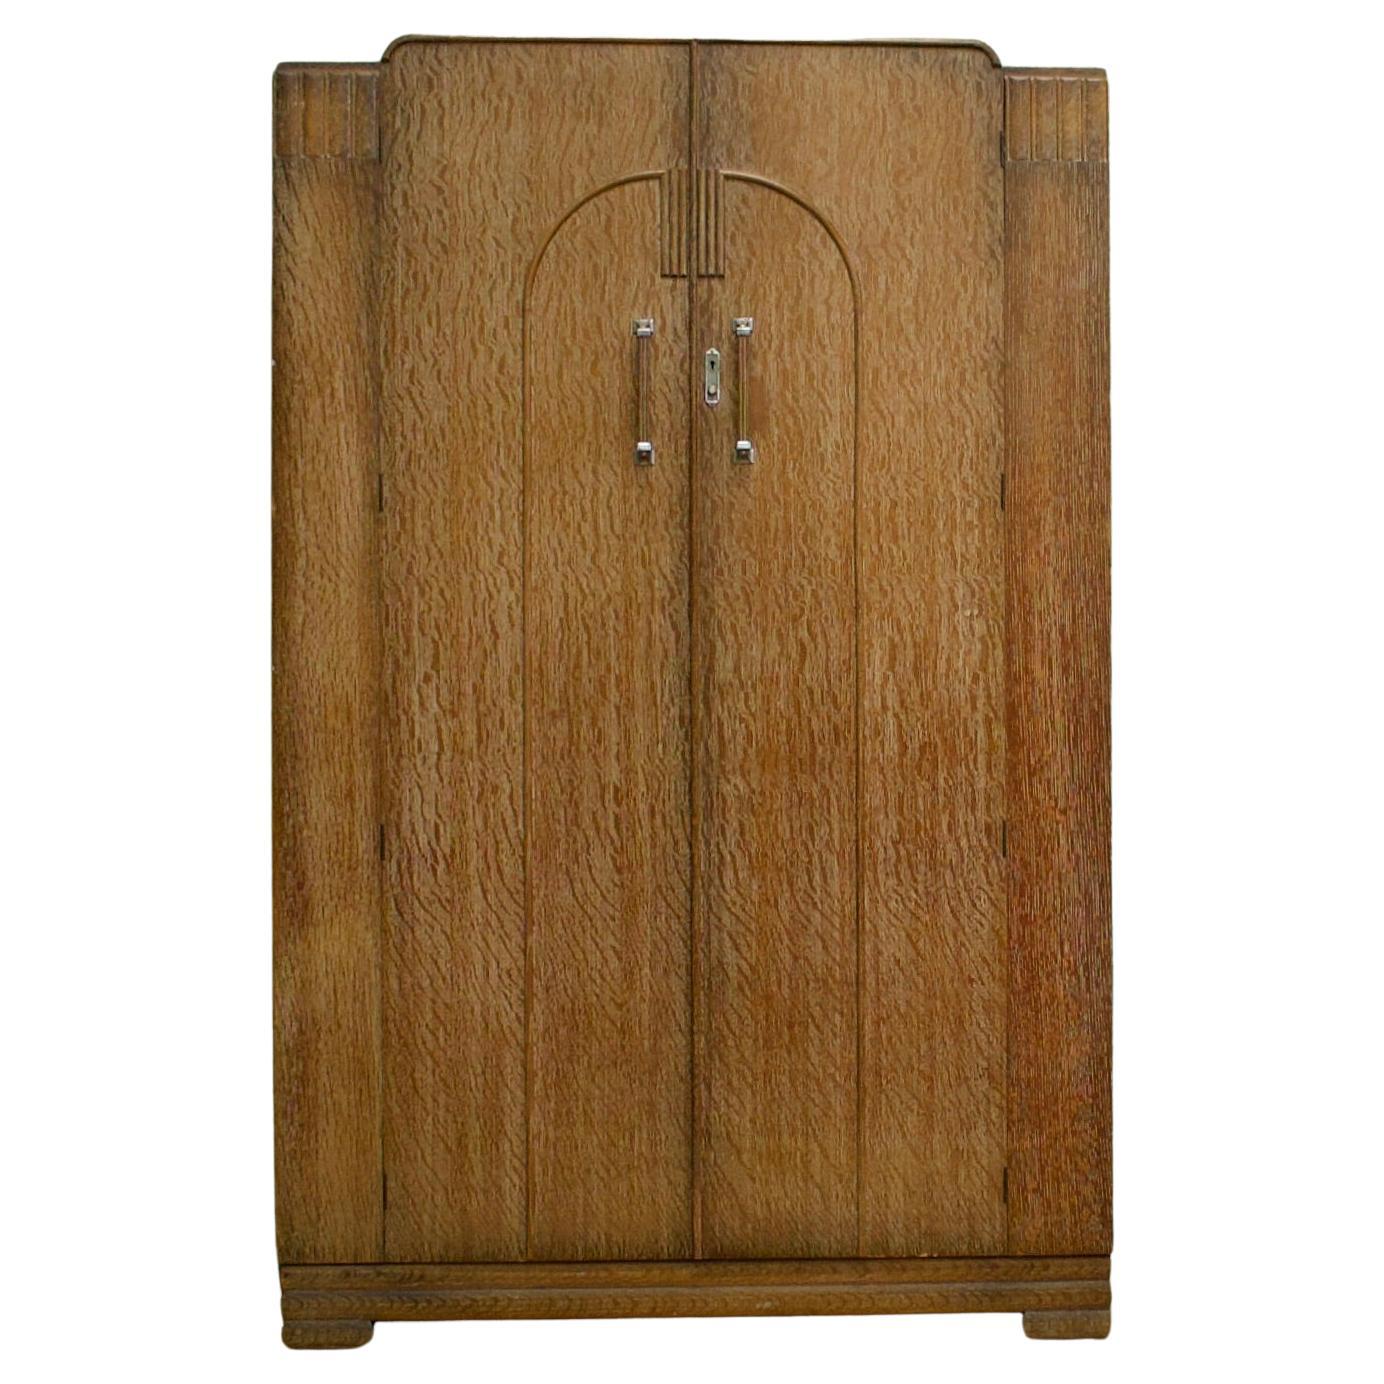 British Vintage Art Deco Limed Oak Wardrobe from Maple and Co, 1930s For Sale